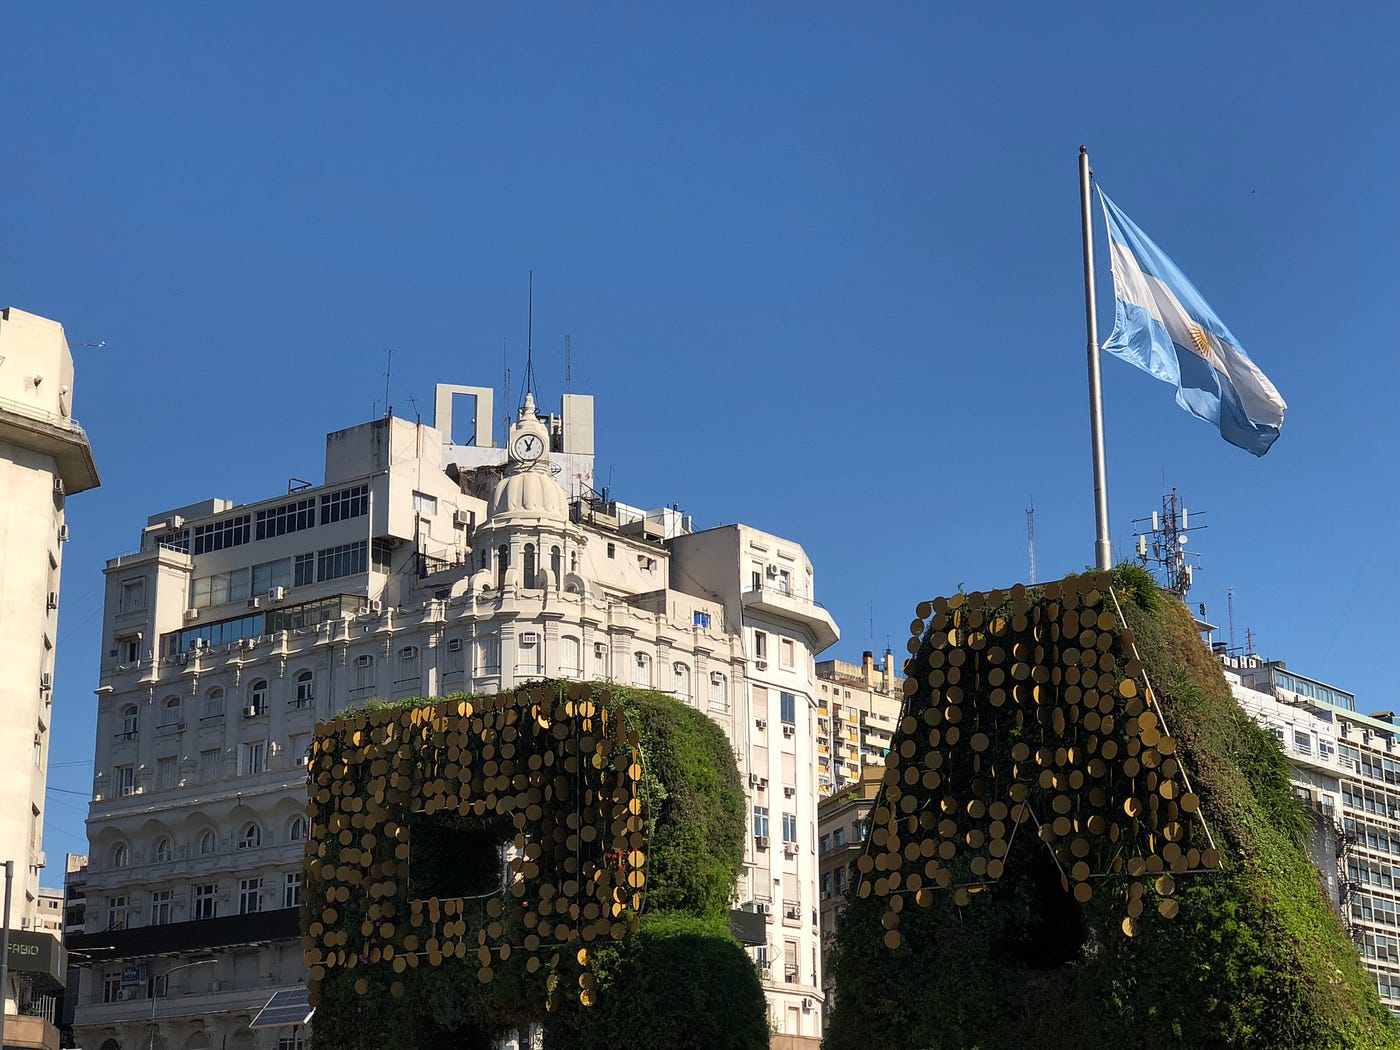 Living in Buenos Aires: A Complete Guide to Moving to Argentina